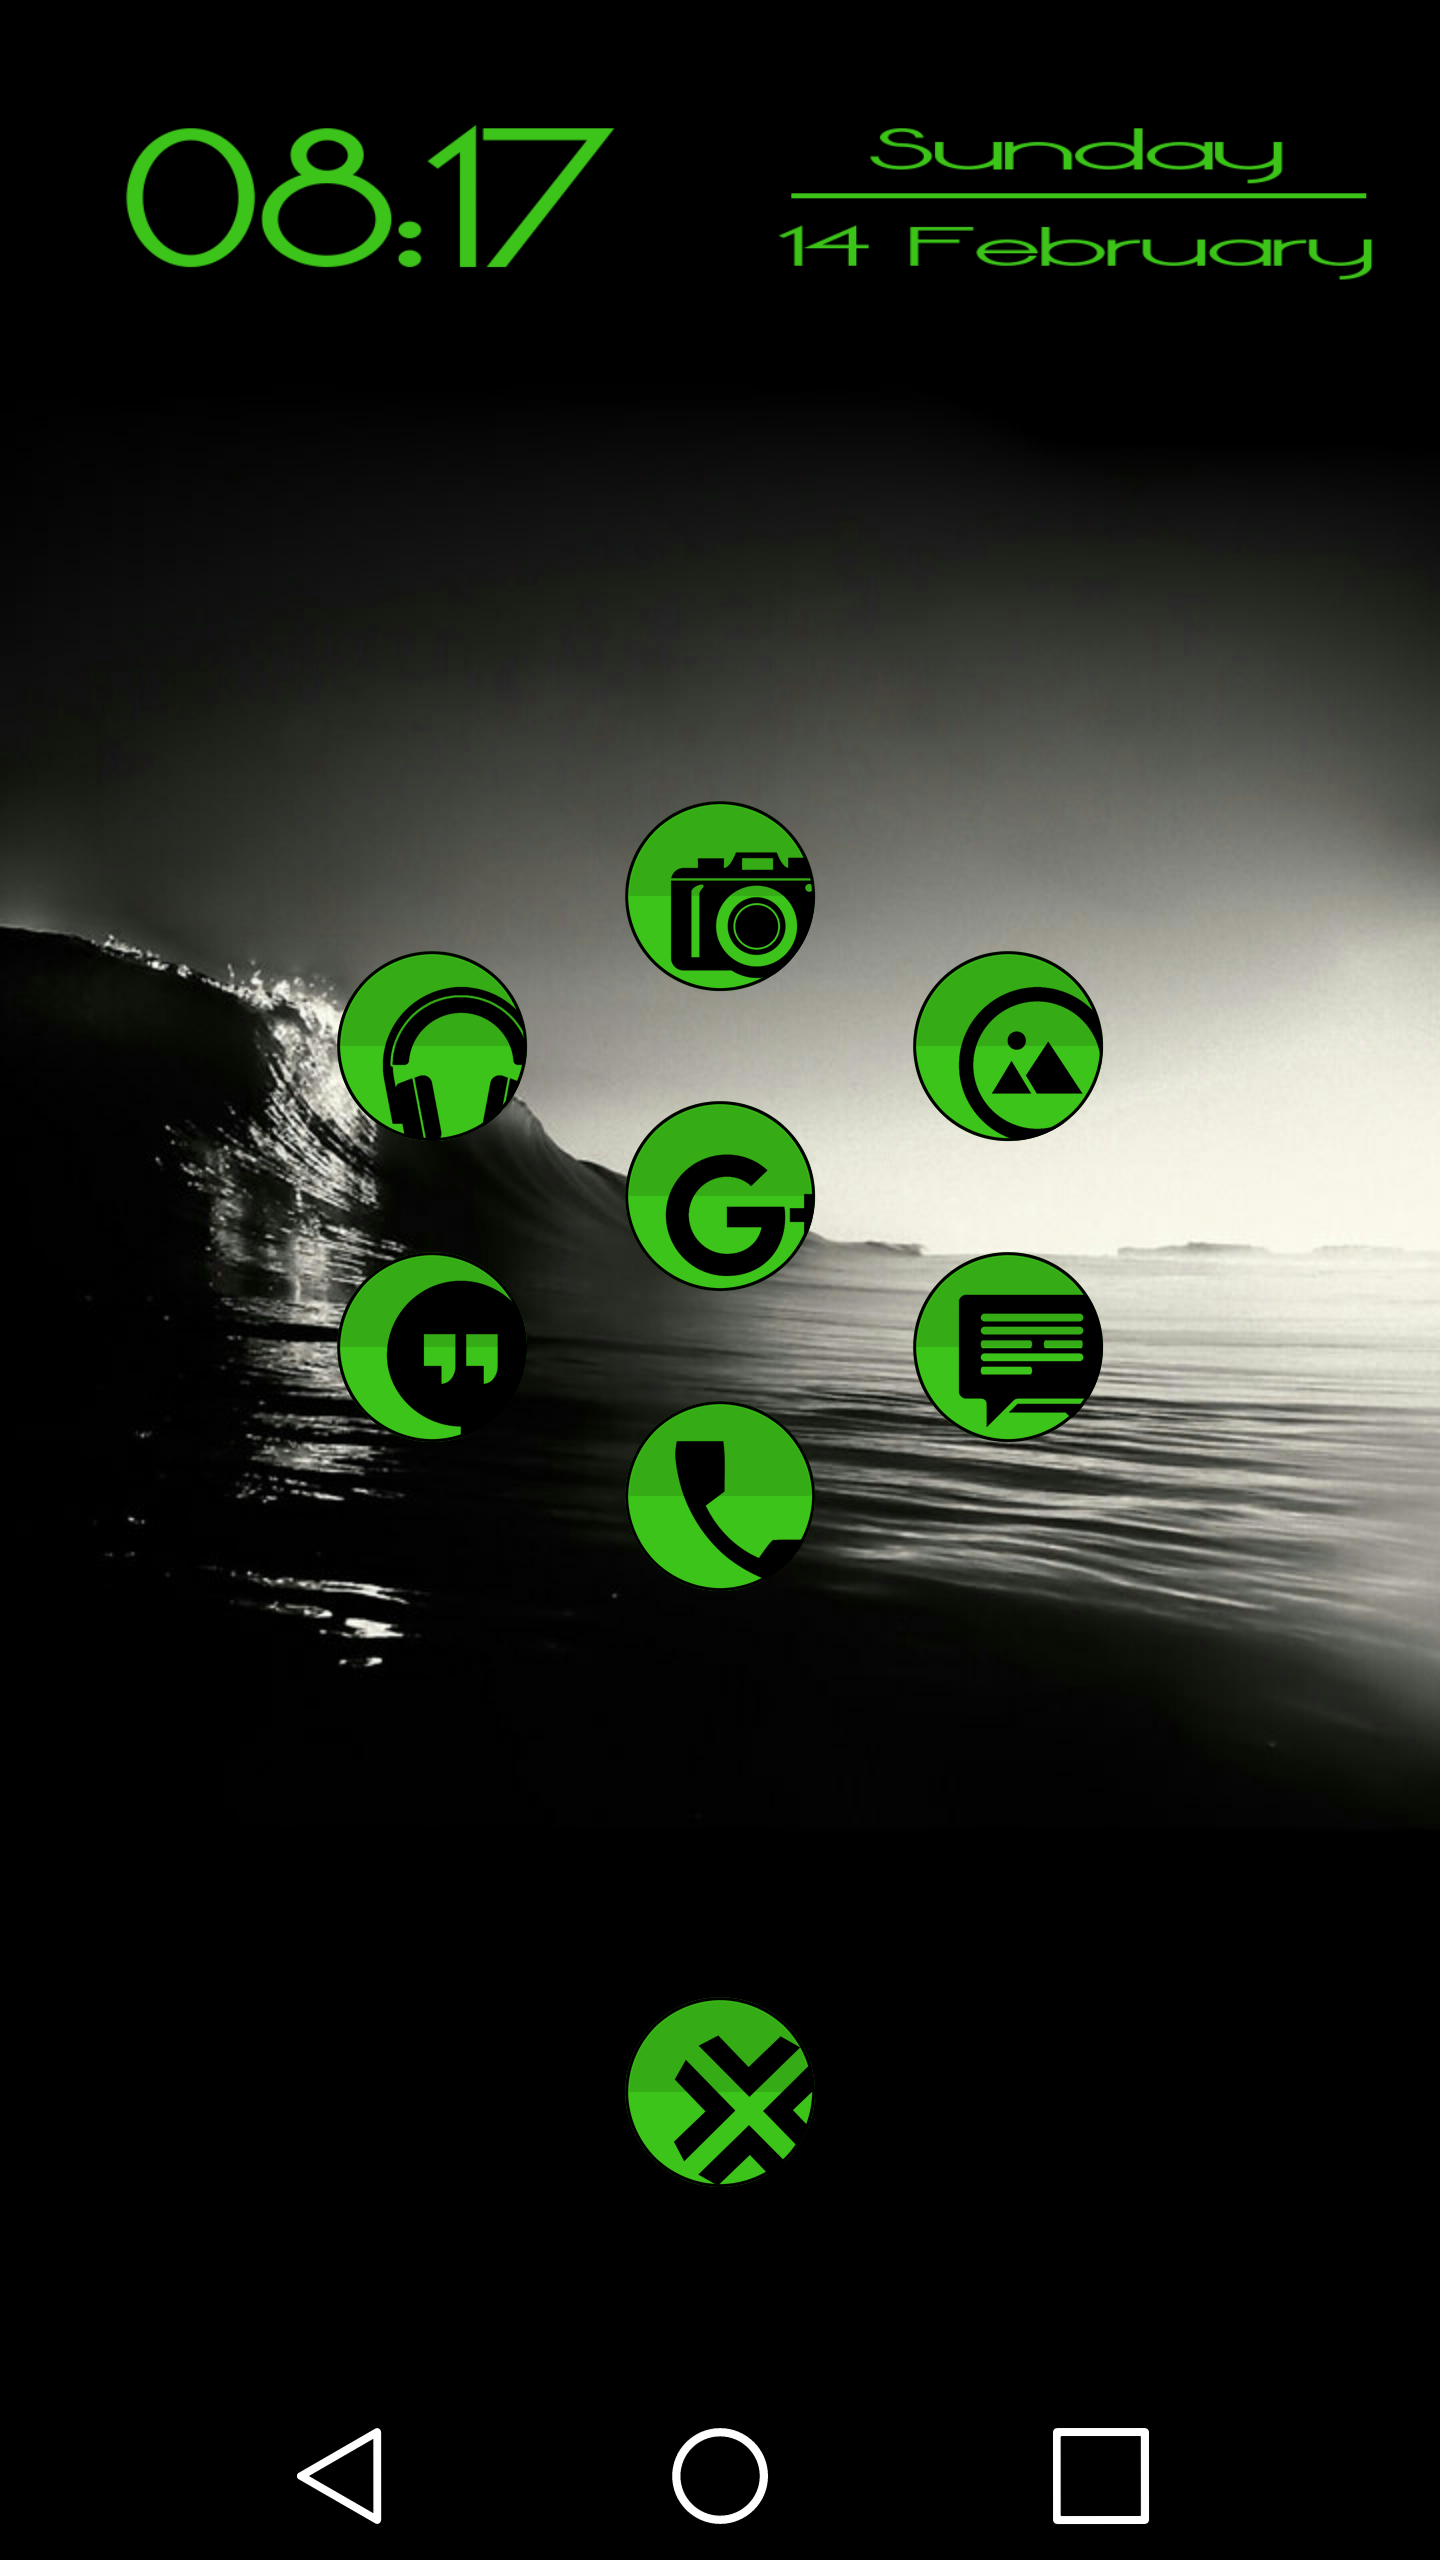 Android application Simp 164 Green - Icon Pack screenshort